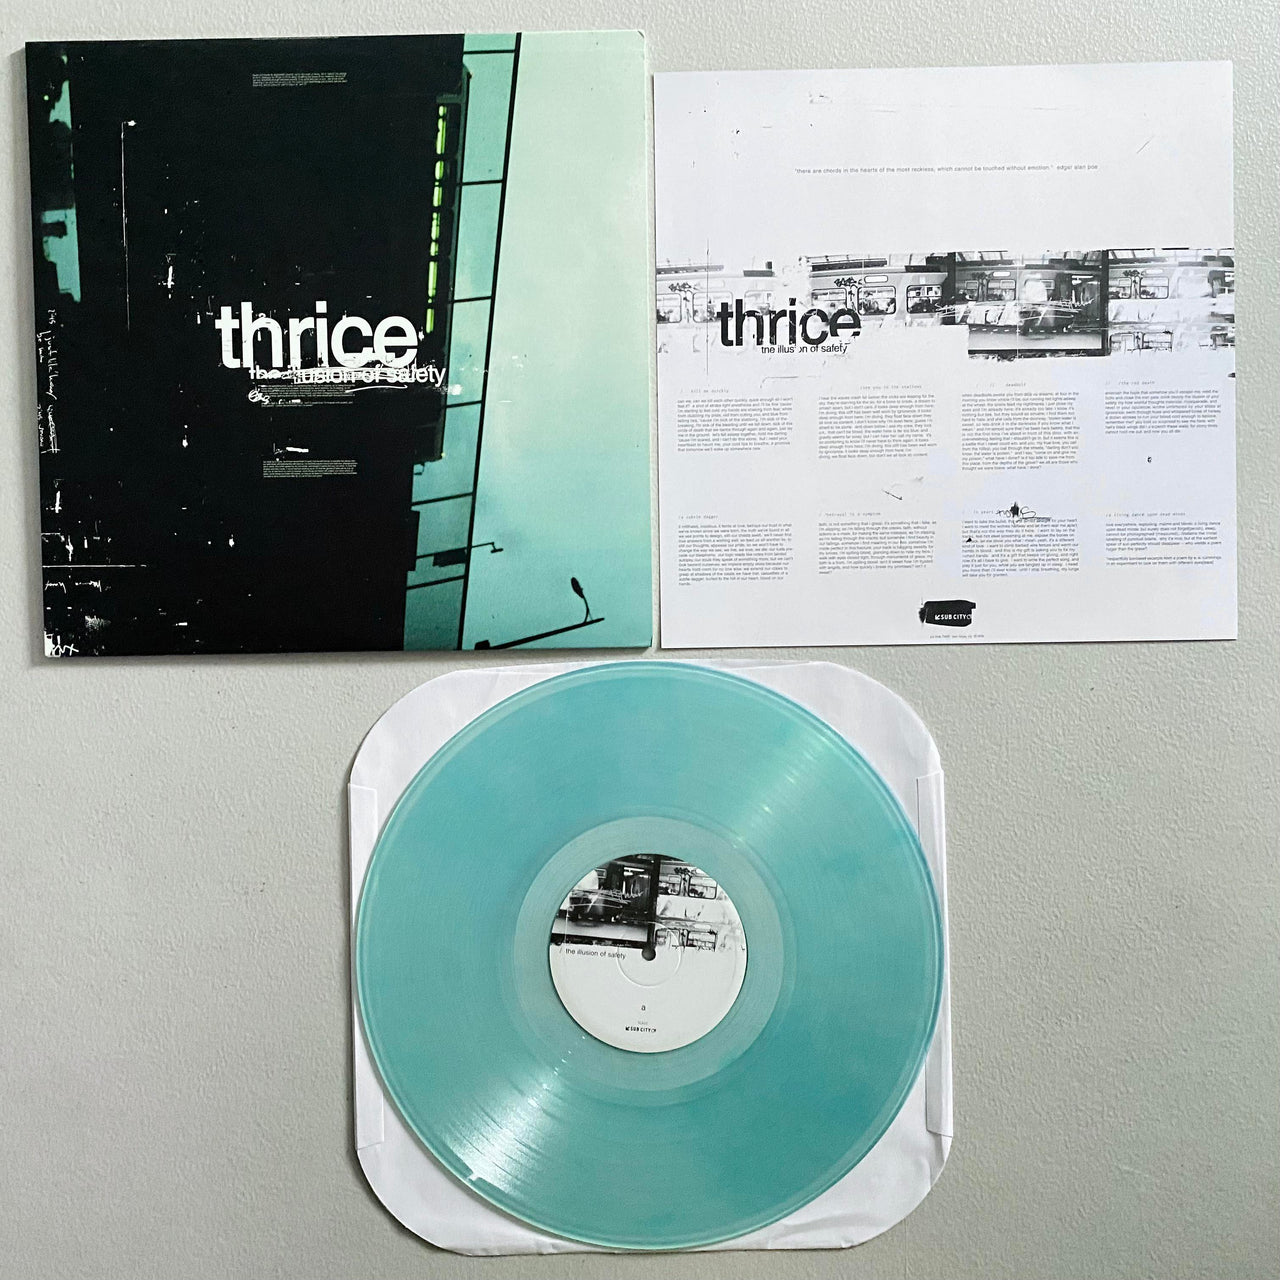 Thrice: The Illusion of Safety Vinyl LP (20th Anniversary, Electric Blue)